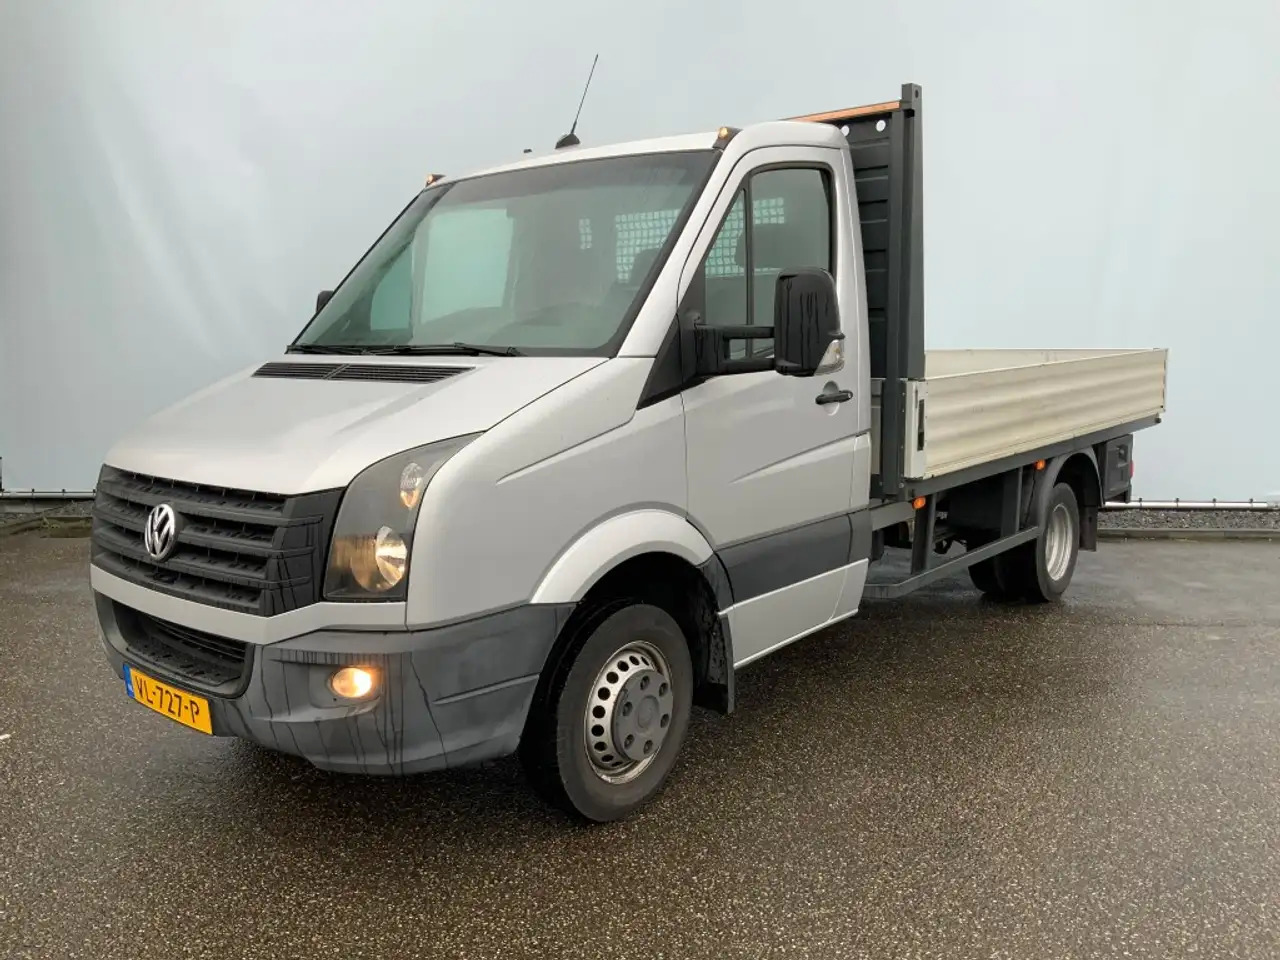 Leasing of Volkswagen Crafter 46 2.0 TDI L2H1 Pick Up Airco Navi Cruise 3 Zits E Volkswagen Crafter 46 2.0 TDI L2H1 Pick Up Airco Navi Cruise 3 Zits E: picture 1